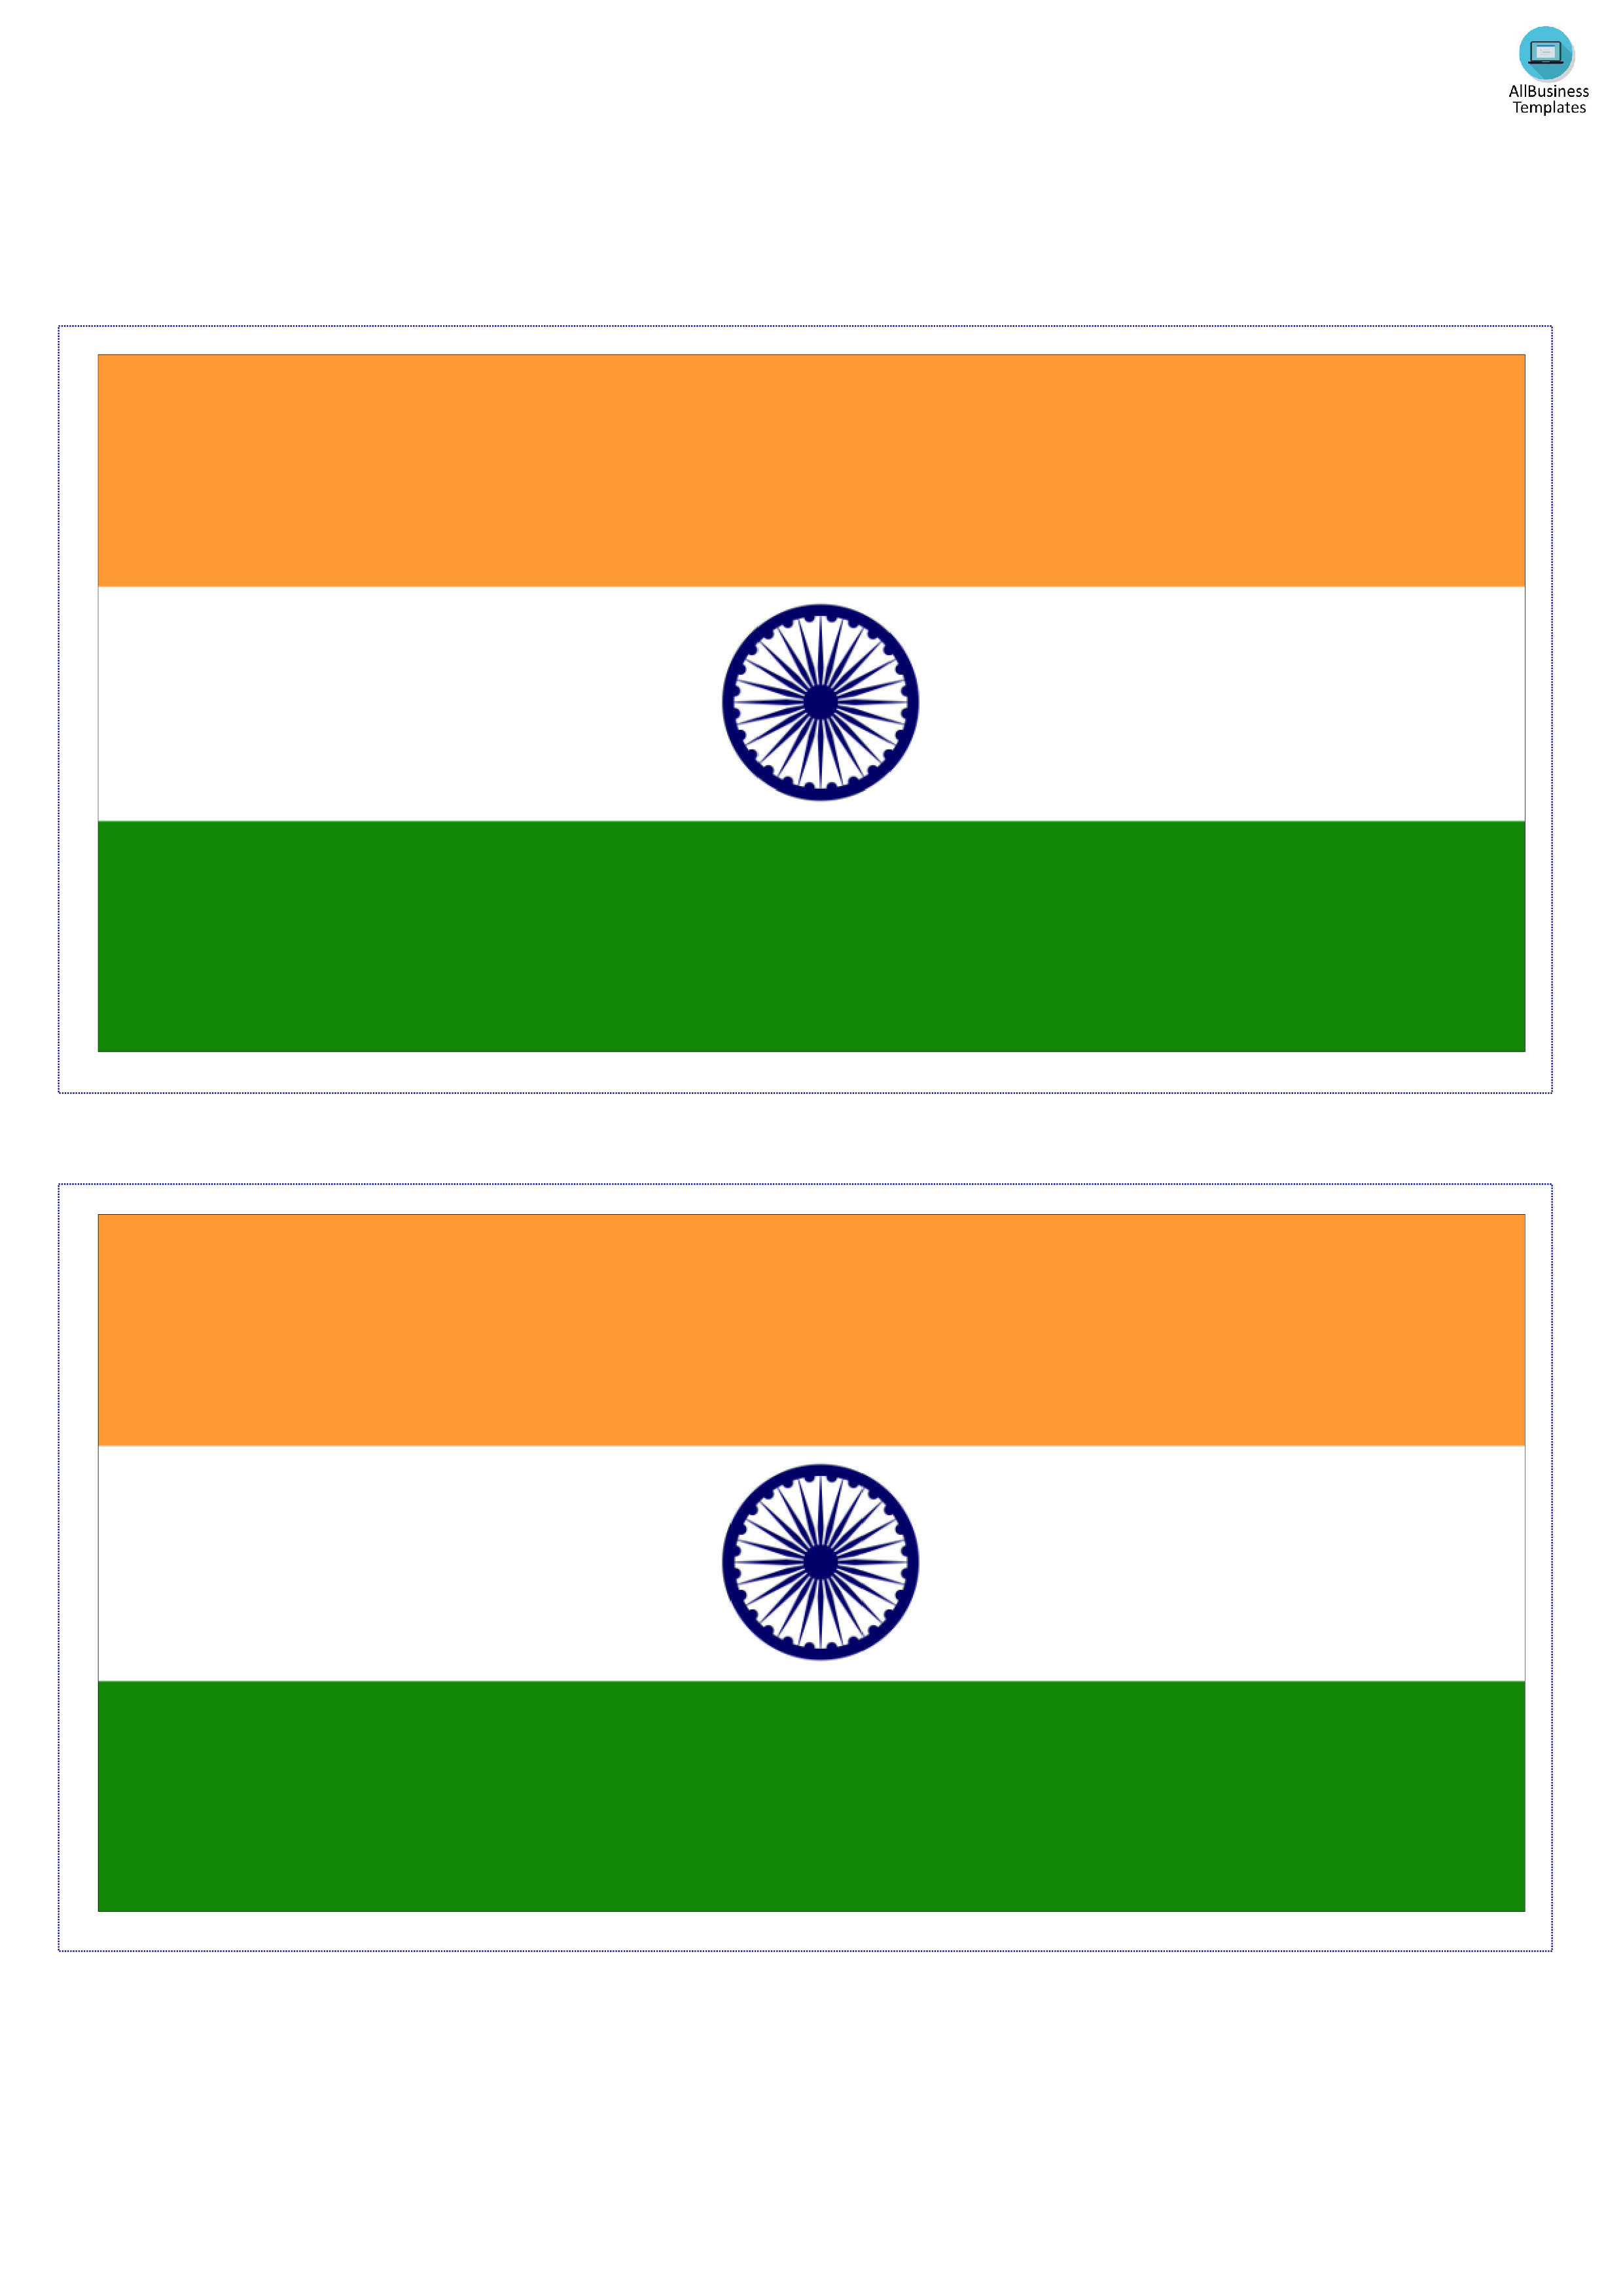 Indian flag pdf download photo to video maker software free download